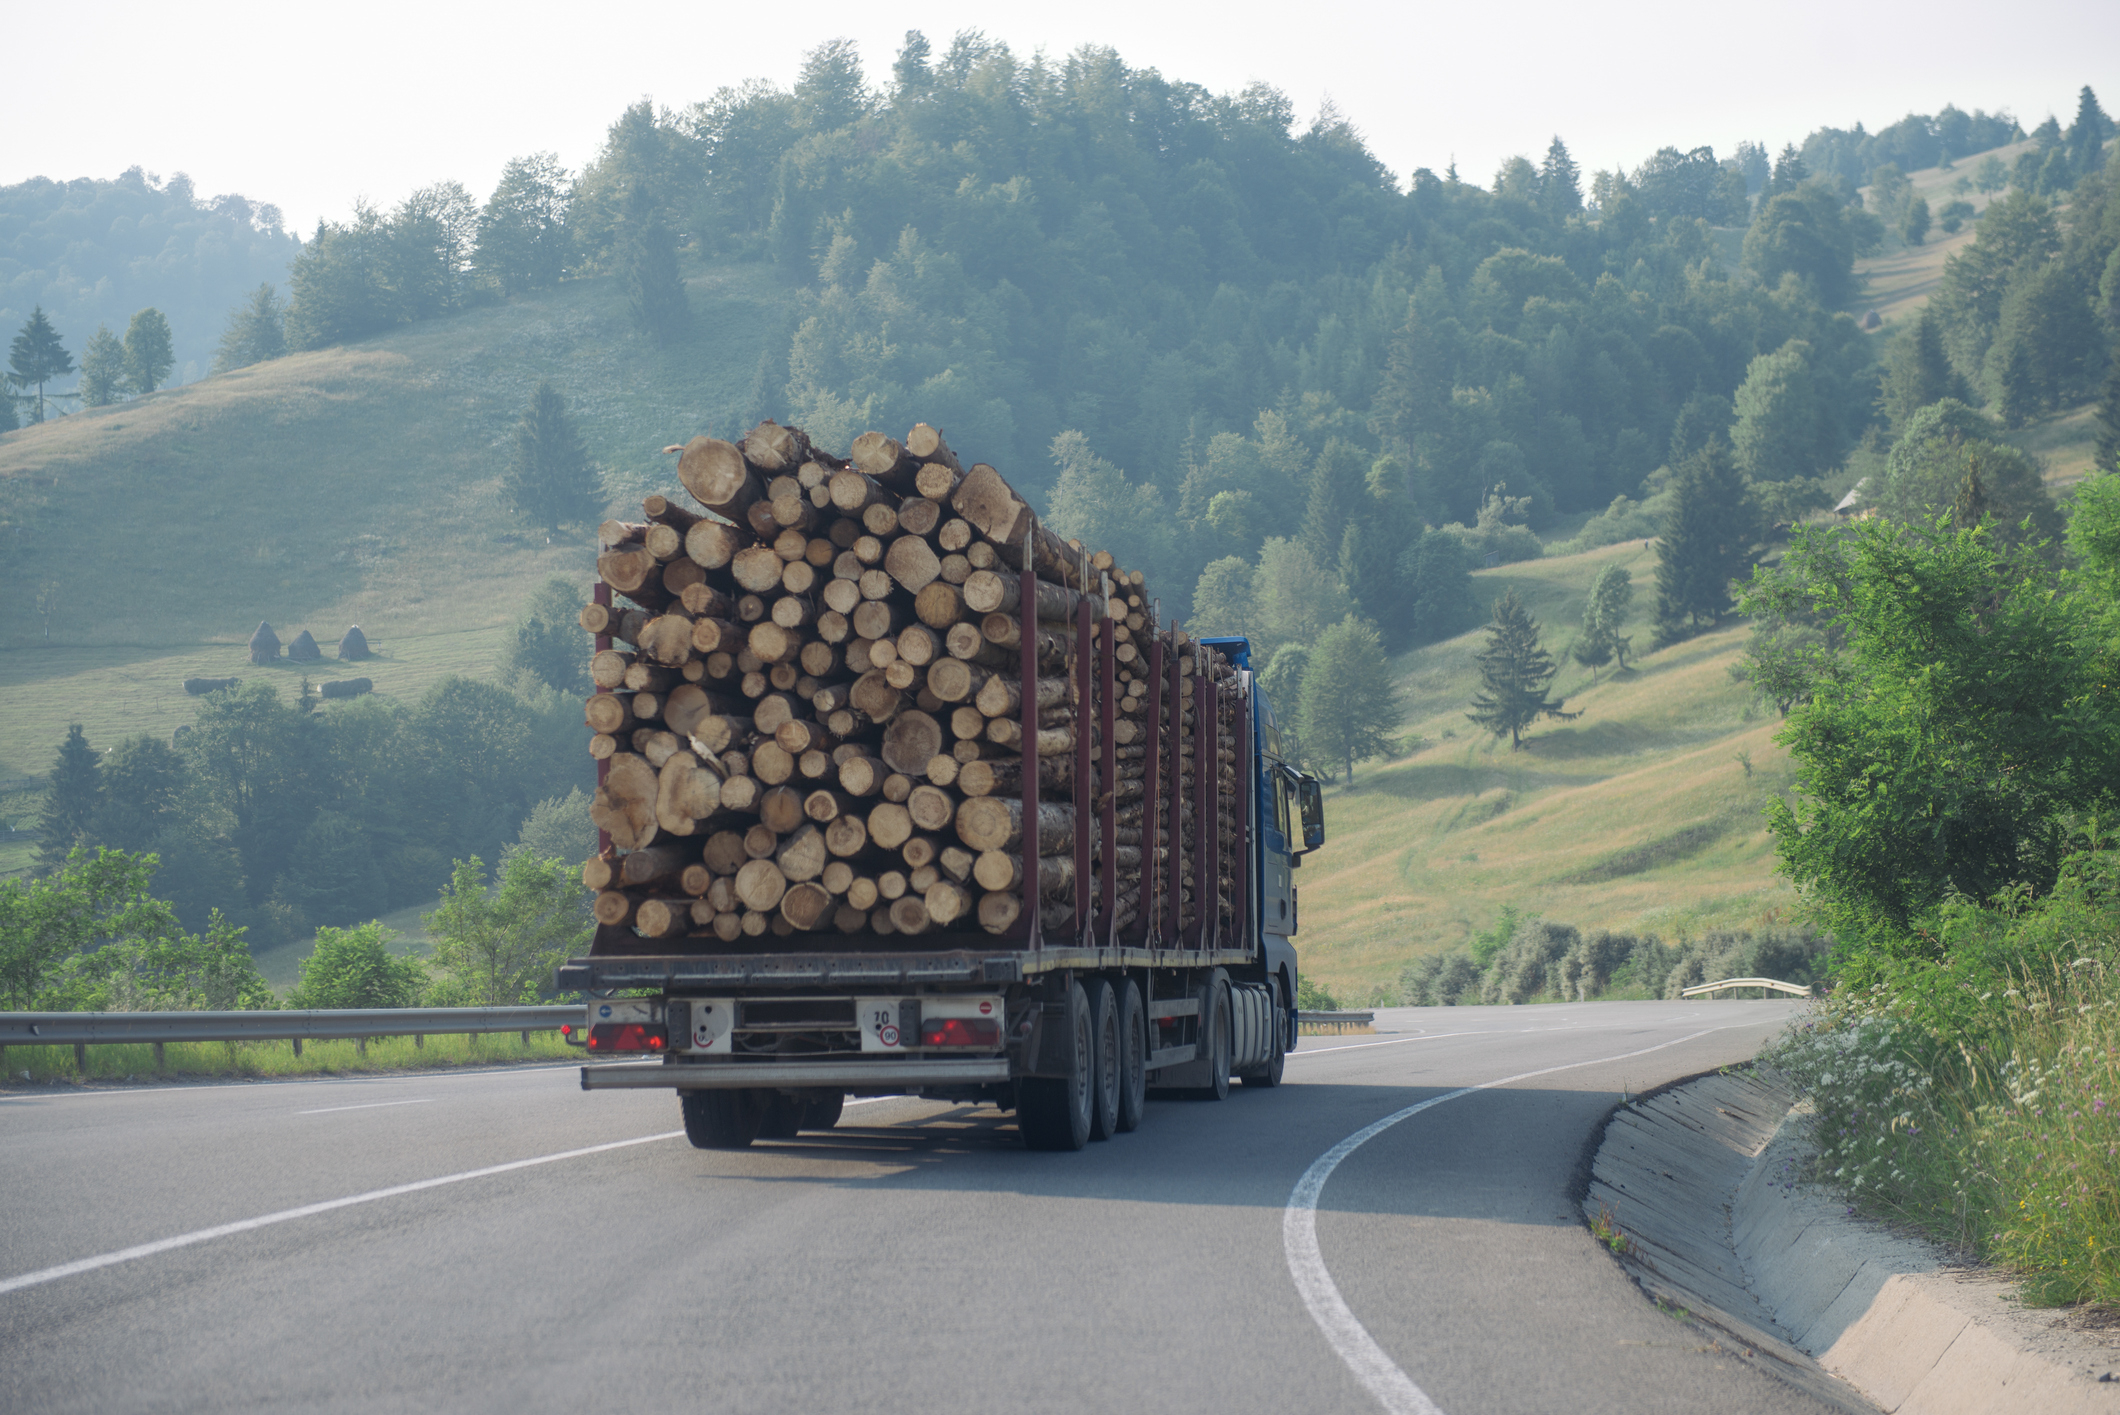 A logger truck on a highway